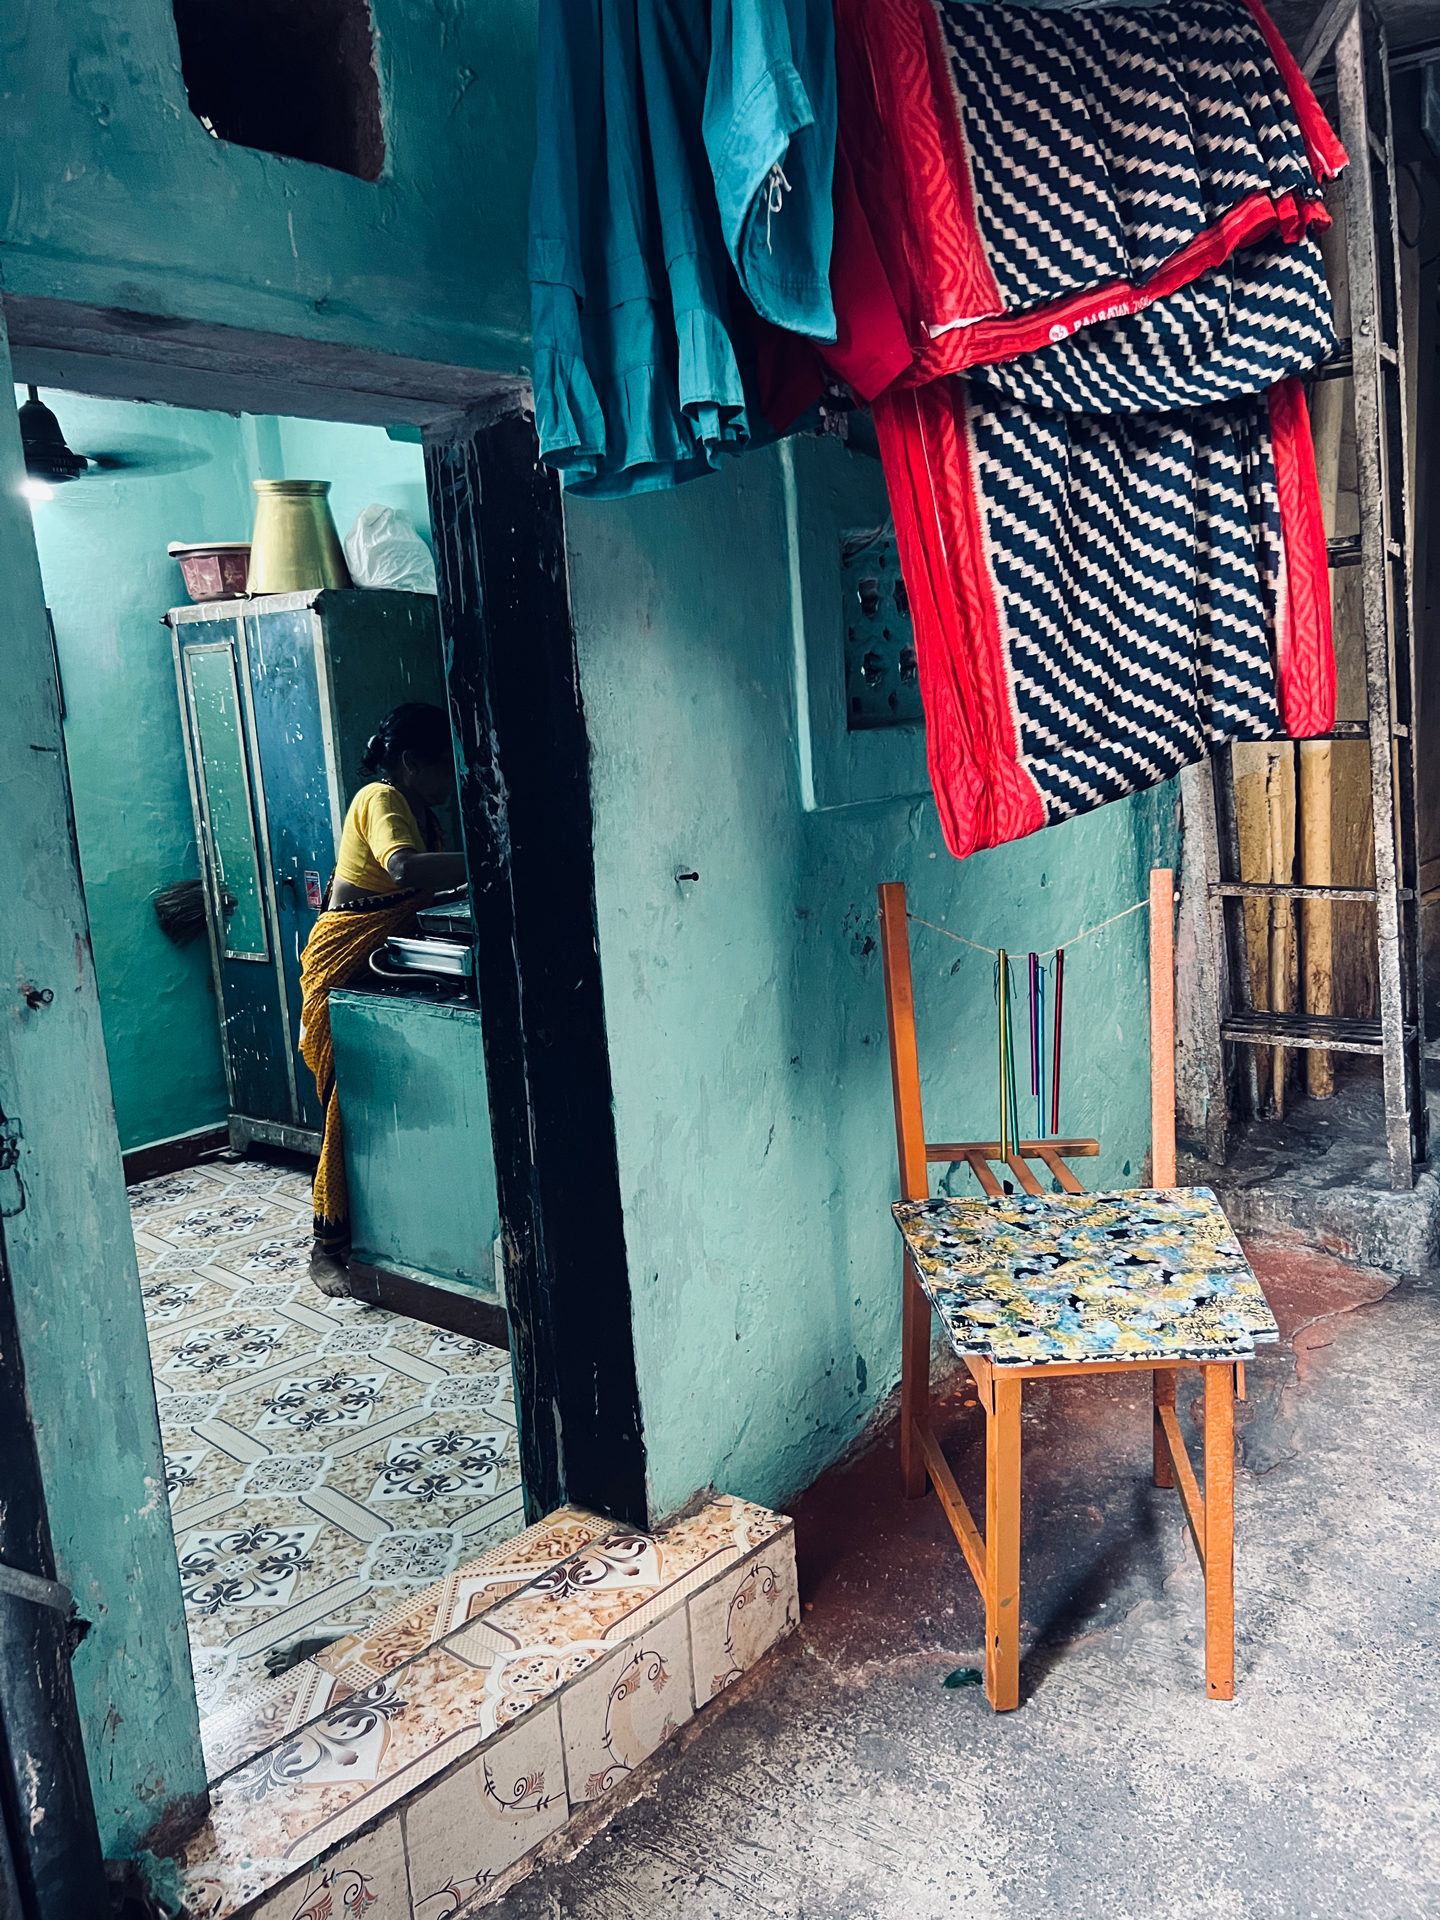 When looking at the unique texture of the Anjaana chair’s seat and legs, you can feel the rawness of Mumbai’s slums